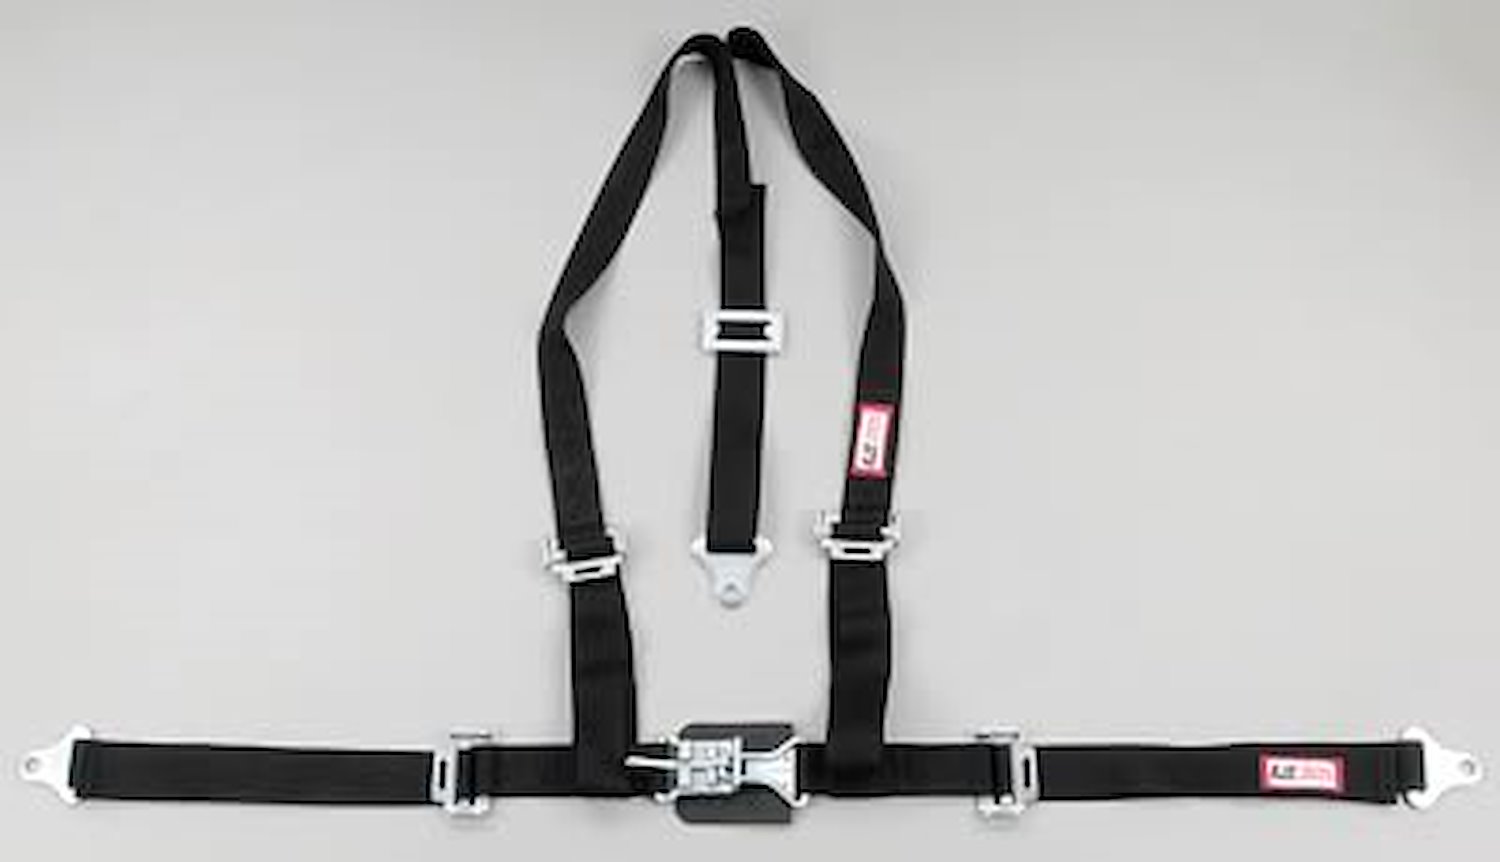 NON-SFI L&L HARNESS 3 PULL UP Lap Belt SNAP SEWN IN 2 S.H. Individual ROLL BAR Mount w/STERNUM STRAP WRAP/SNAP GRAY